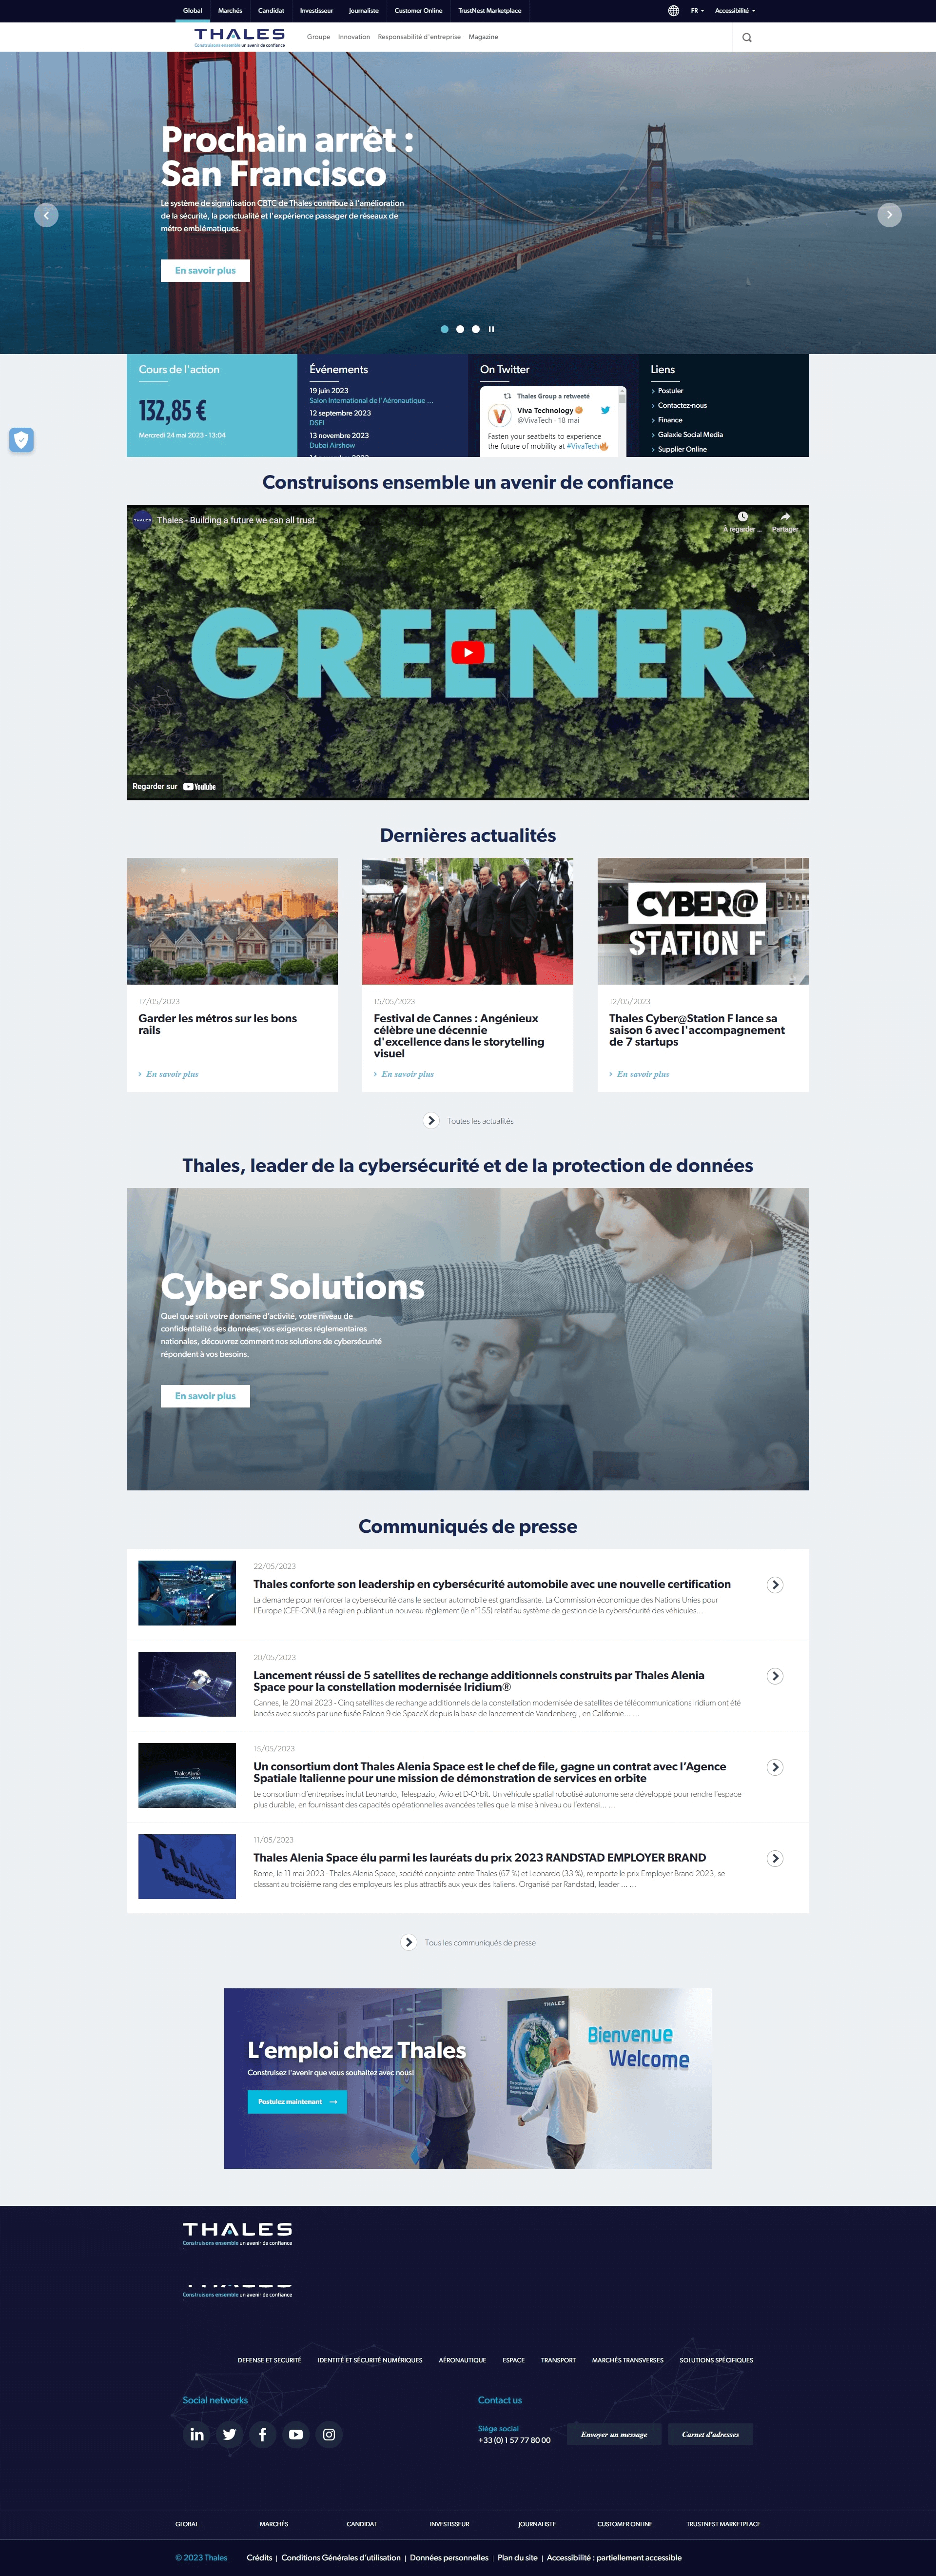 thales groupe site web